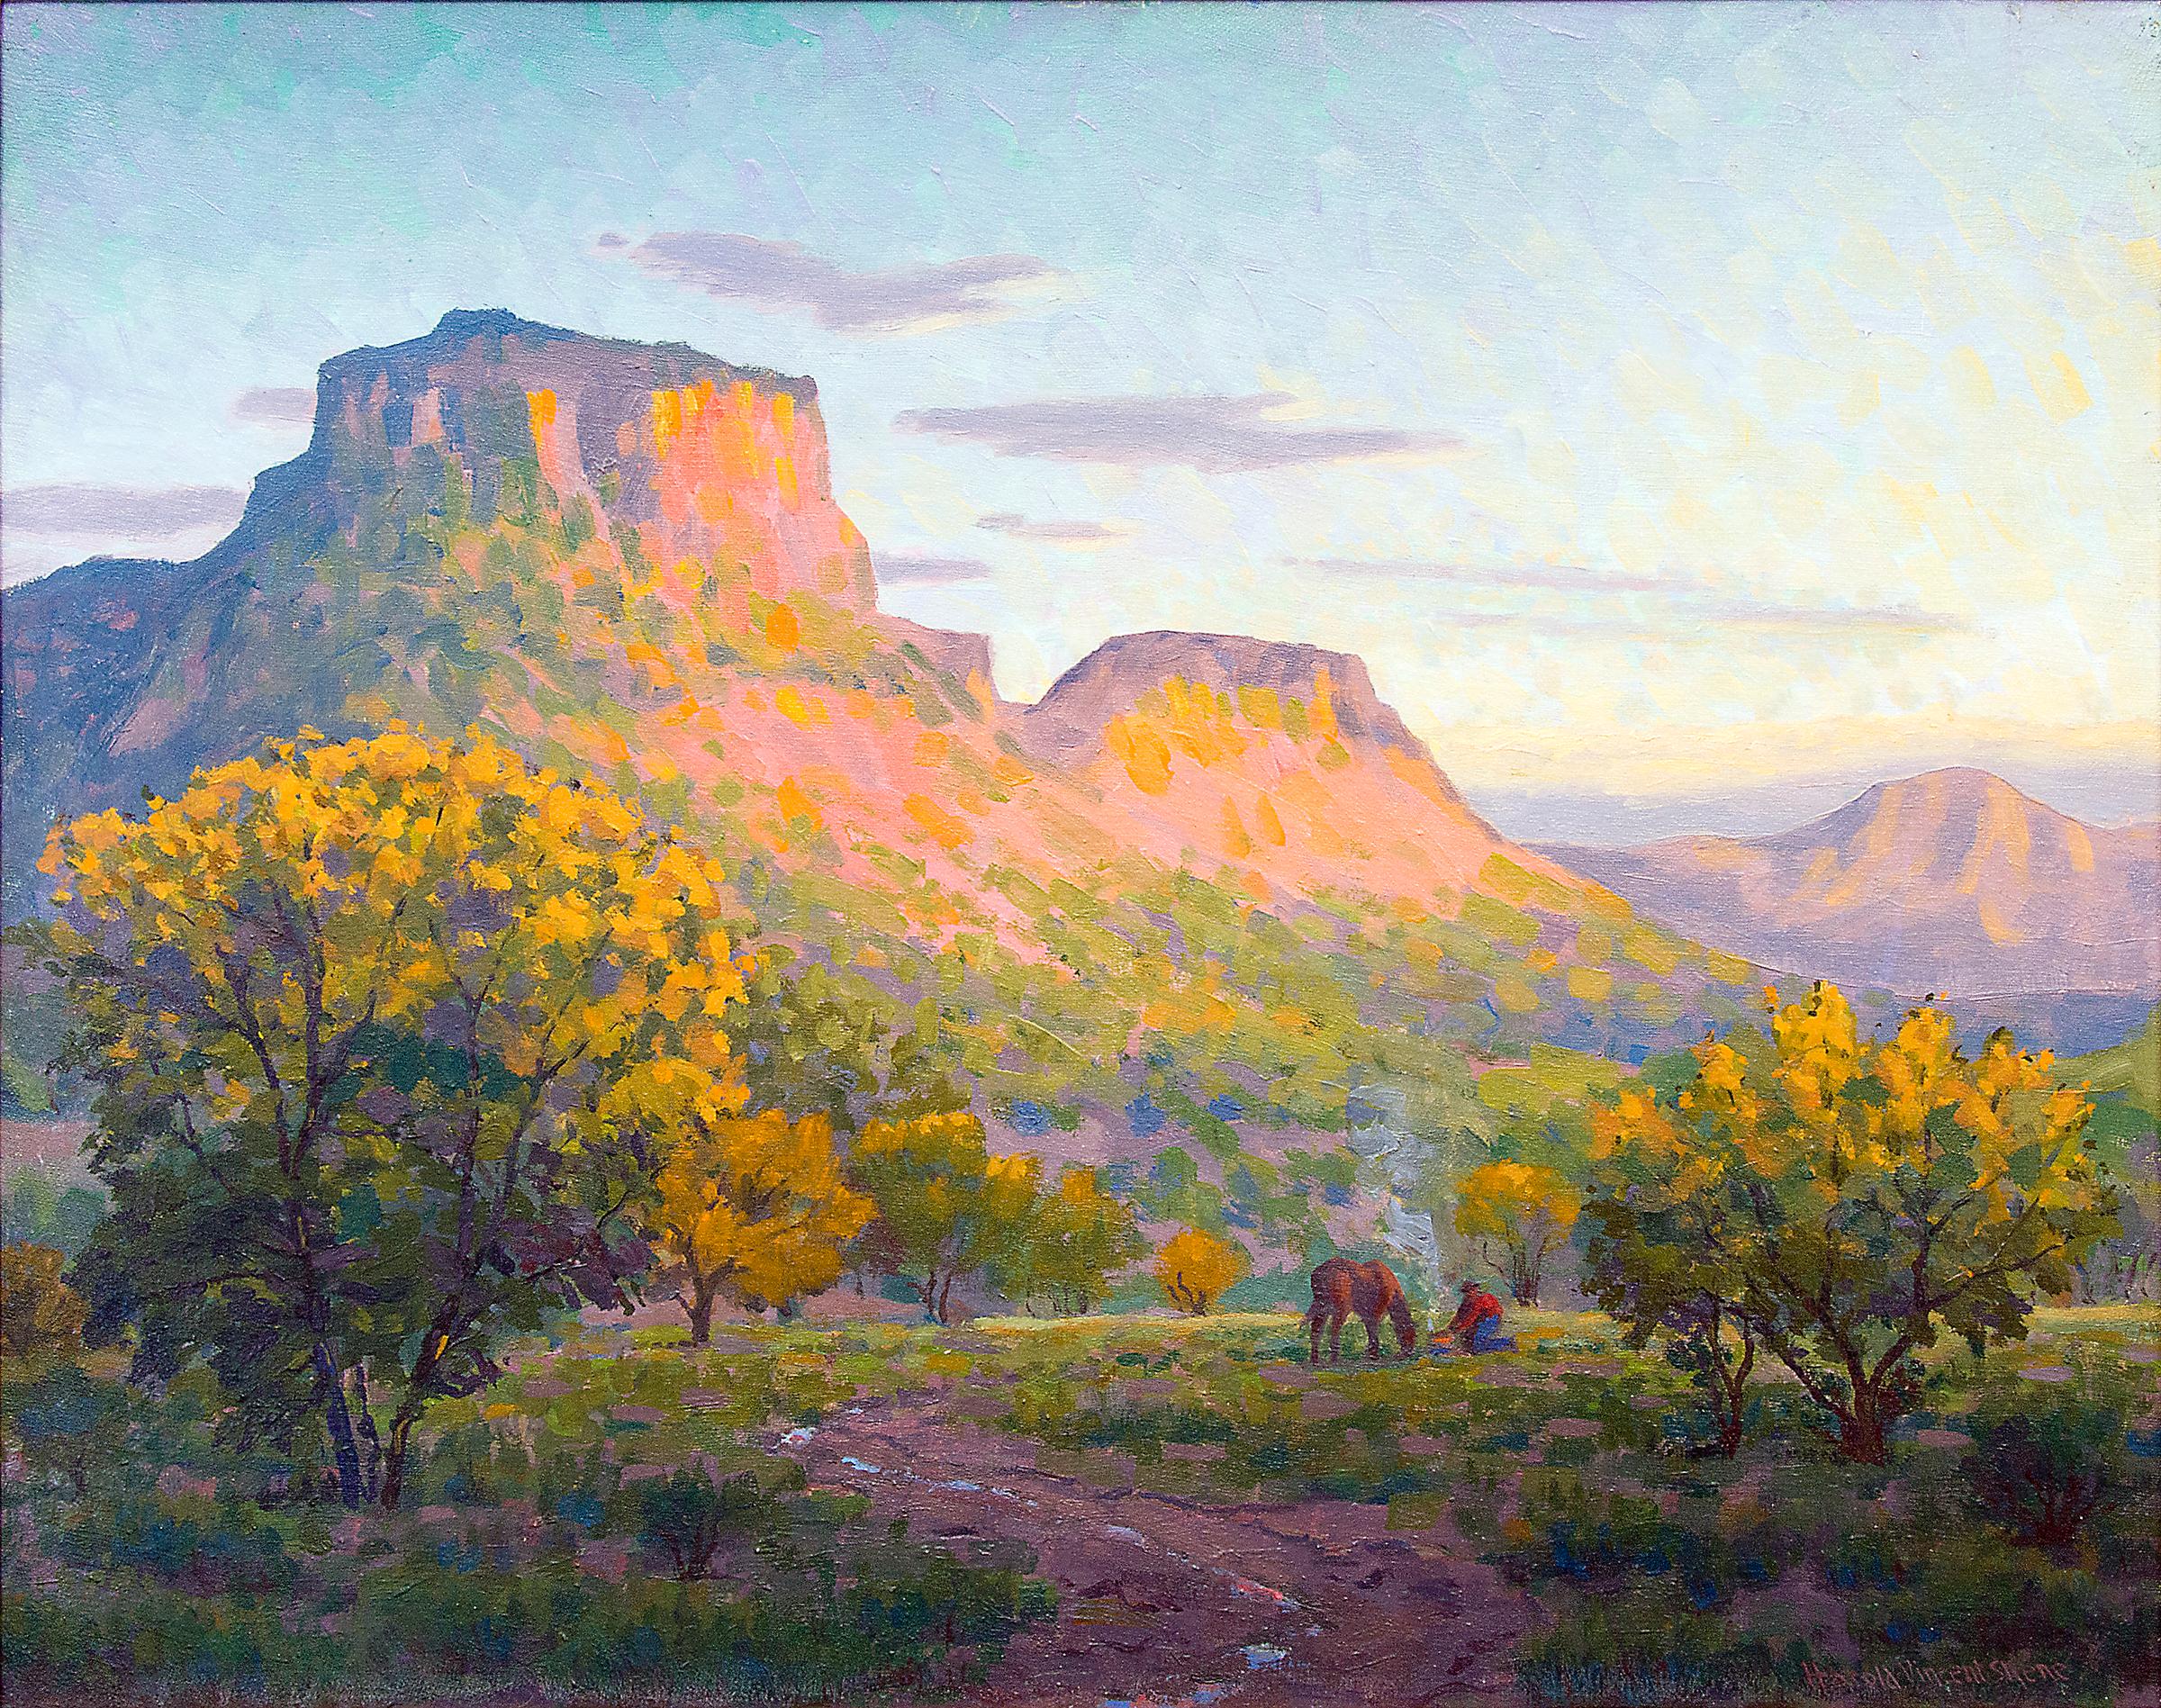 Glowing Mesa (Horses at Sunset, Colorado Landscape) - Painting by Harold Vincent Skene